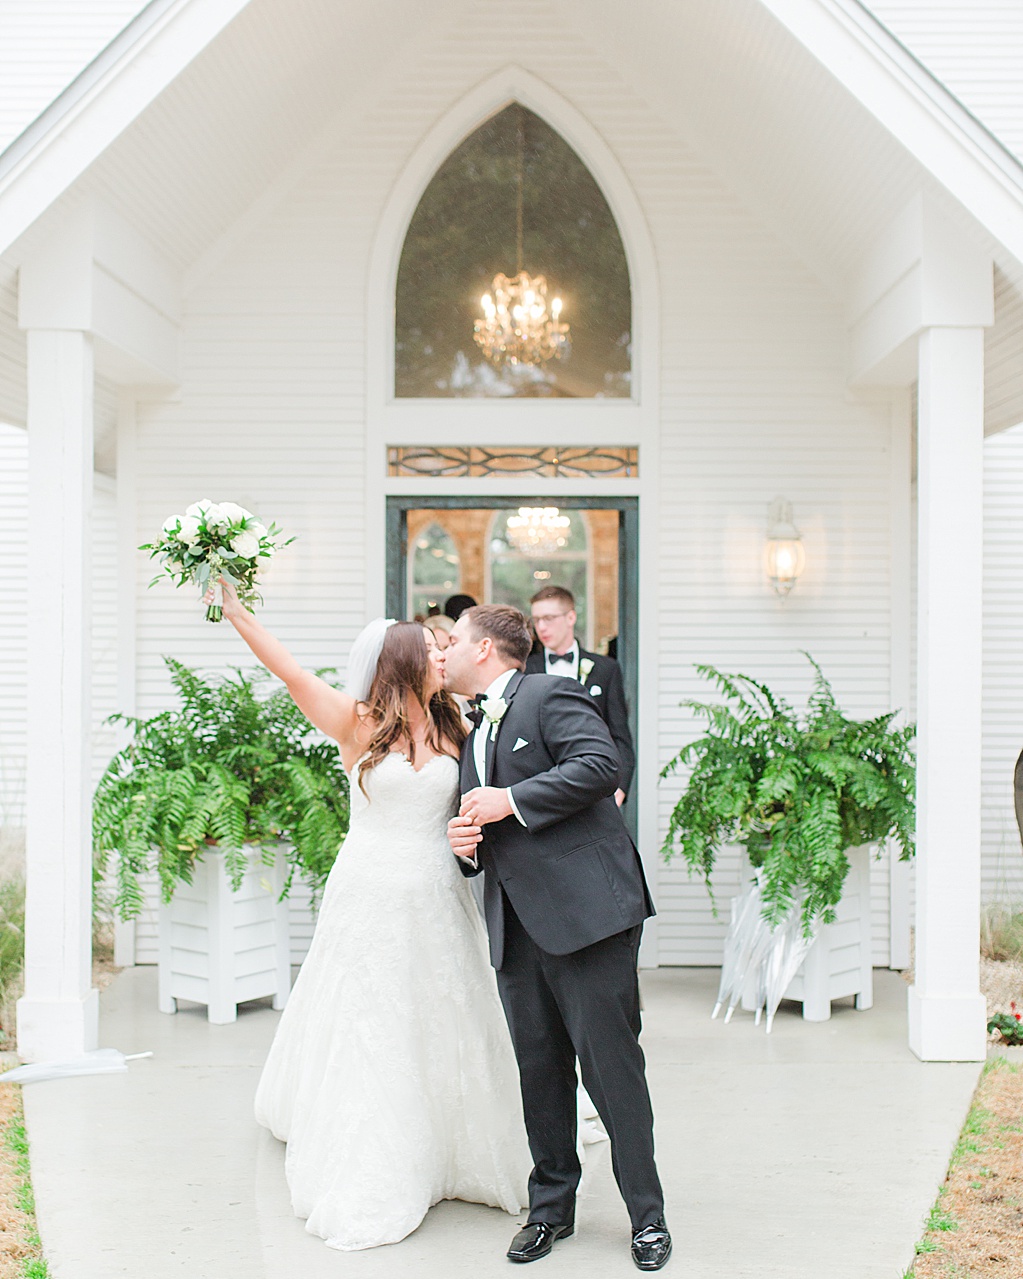 A Rainy Day Black and White Wedding at The Chandelier of Gruene 0109